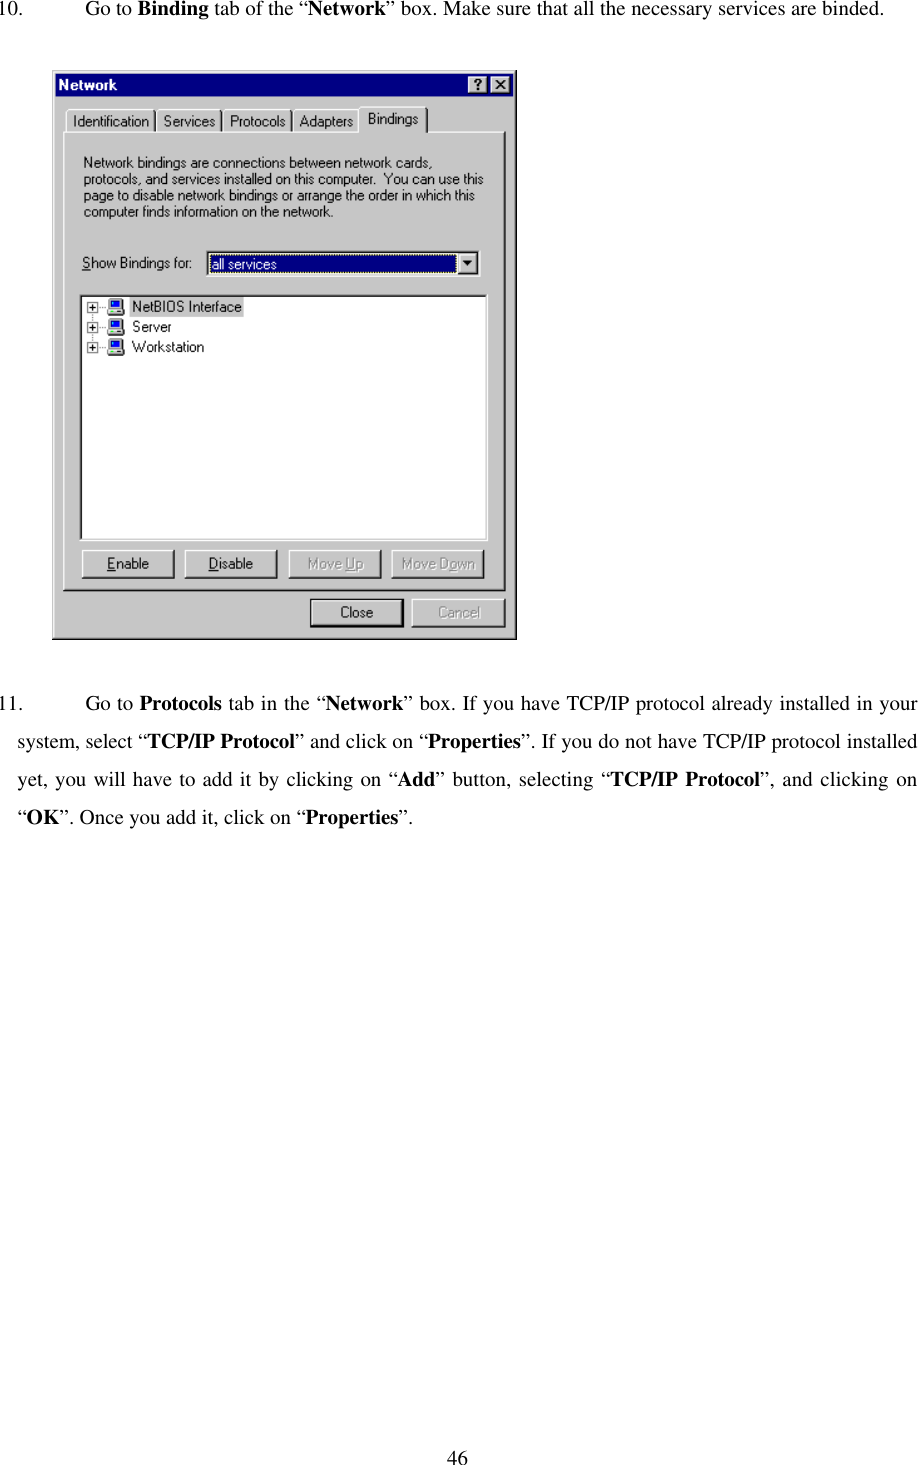 4610. Go to Binding tab of the “Network” box. Make sure that all the necessary services are binded.          11. Go to Protocols tab in the “Network” box. If you have TCP/IP protocol already installed in yoursystem, select “TCP/IP Protocol” and click on “Properties”. If you do not have TCP/IP protocol installedyet, you will have to add it by clicking on “Add” button, selecting “TCP/IP Protocol”, and clicking on“OK”. Once you add it, click on “Properties”.